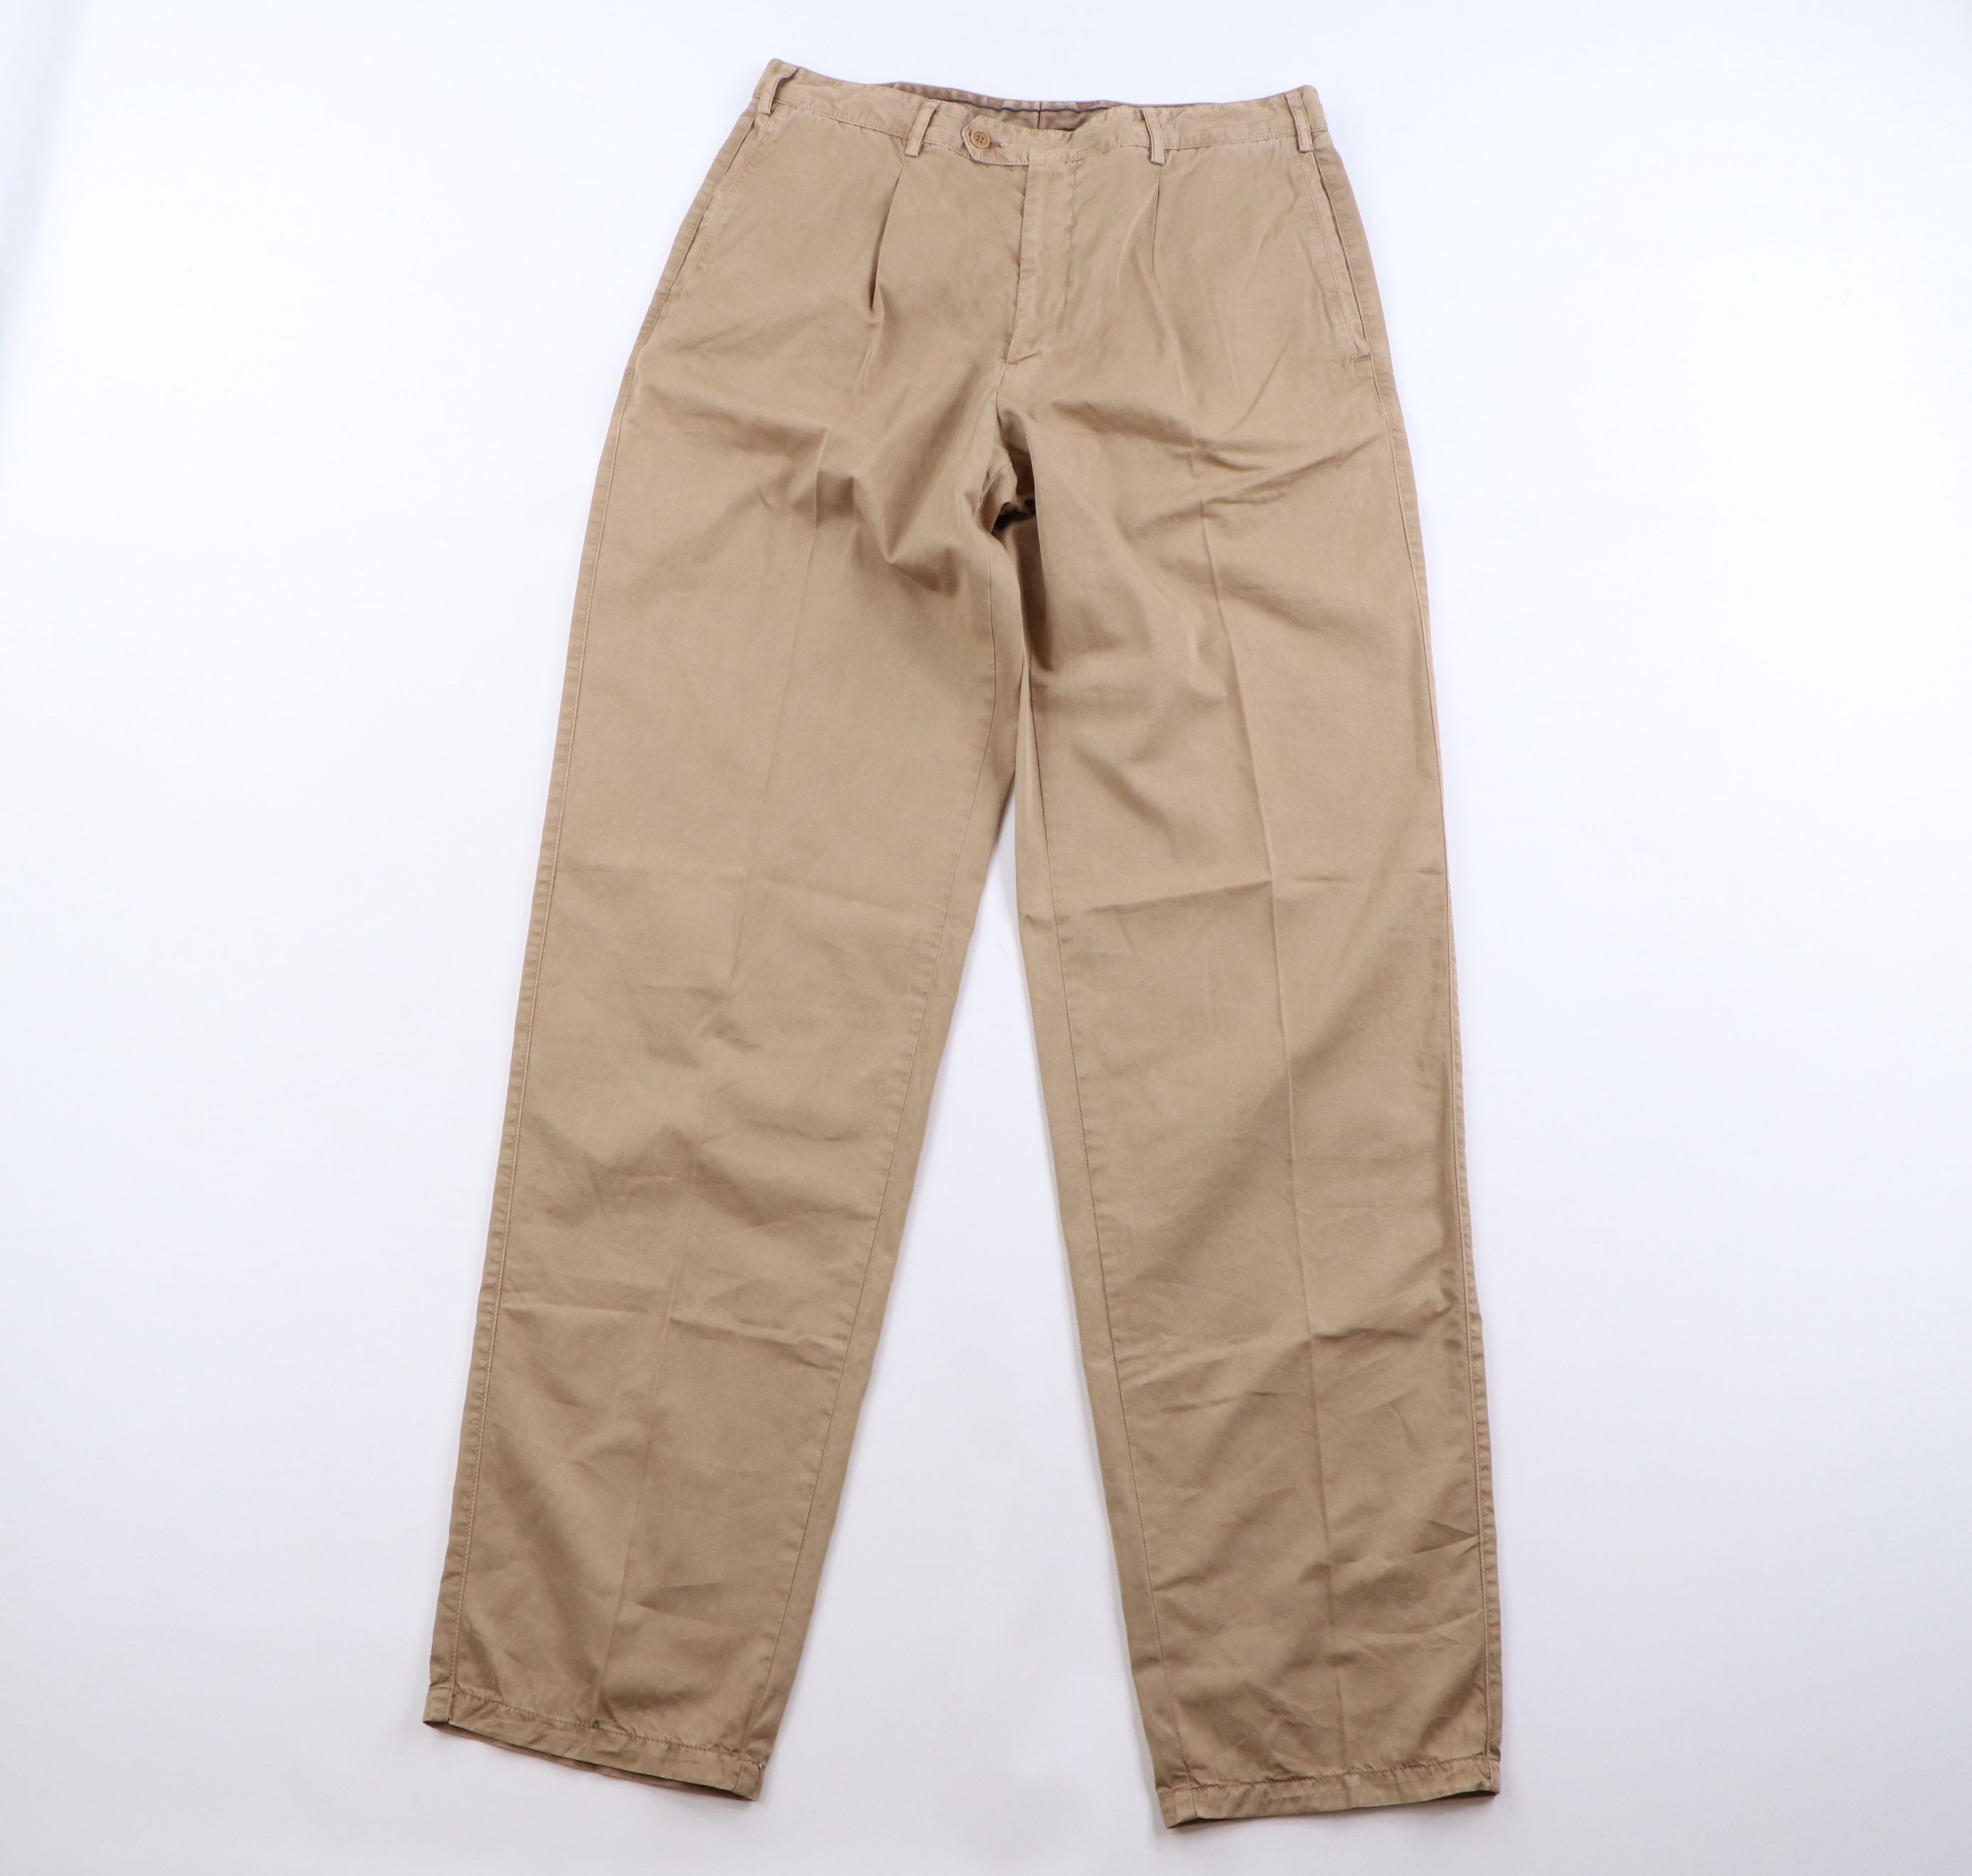 Vintage Paul & Shark Stonewash Pleated Flying Chino Pants Cotton Size US 36 / EU 52 - 1 Preview